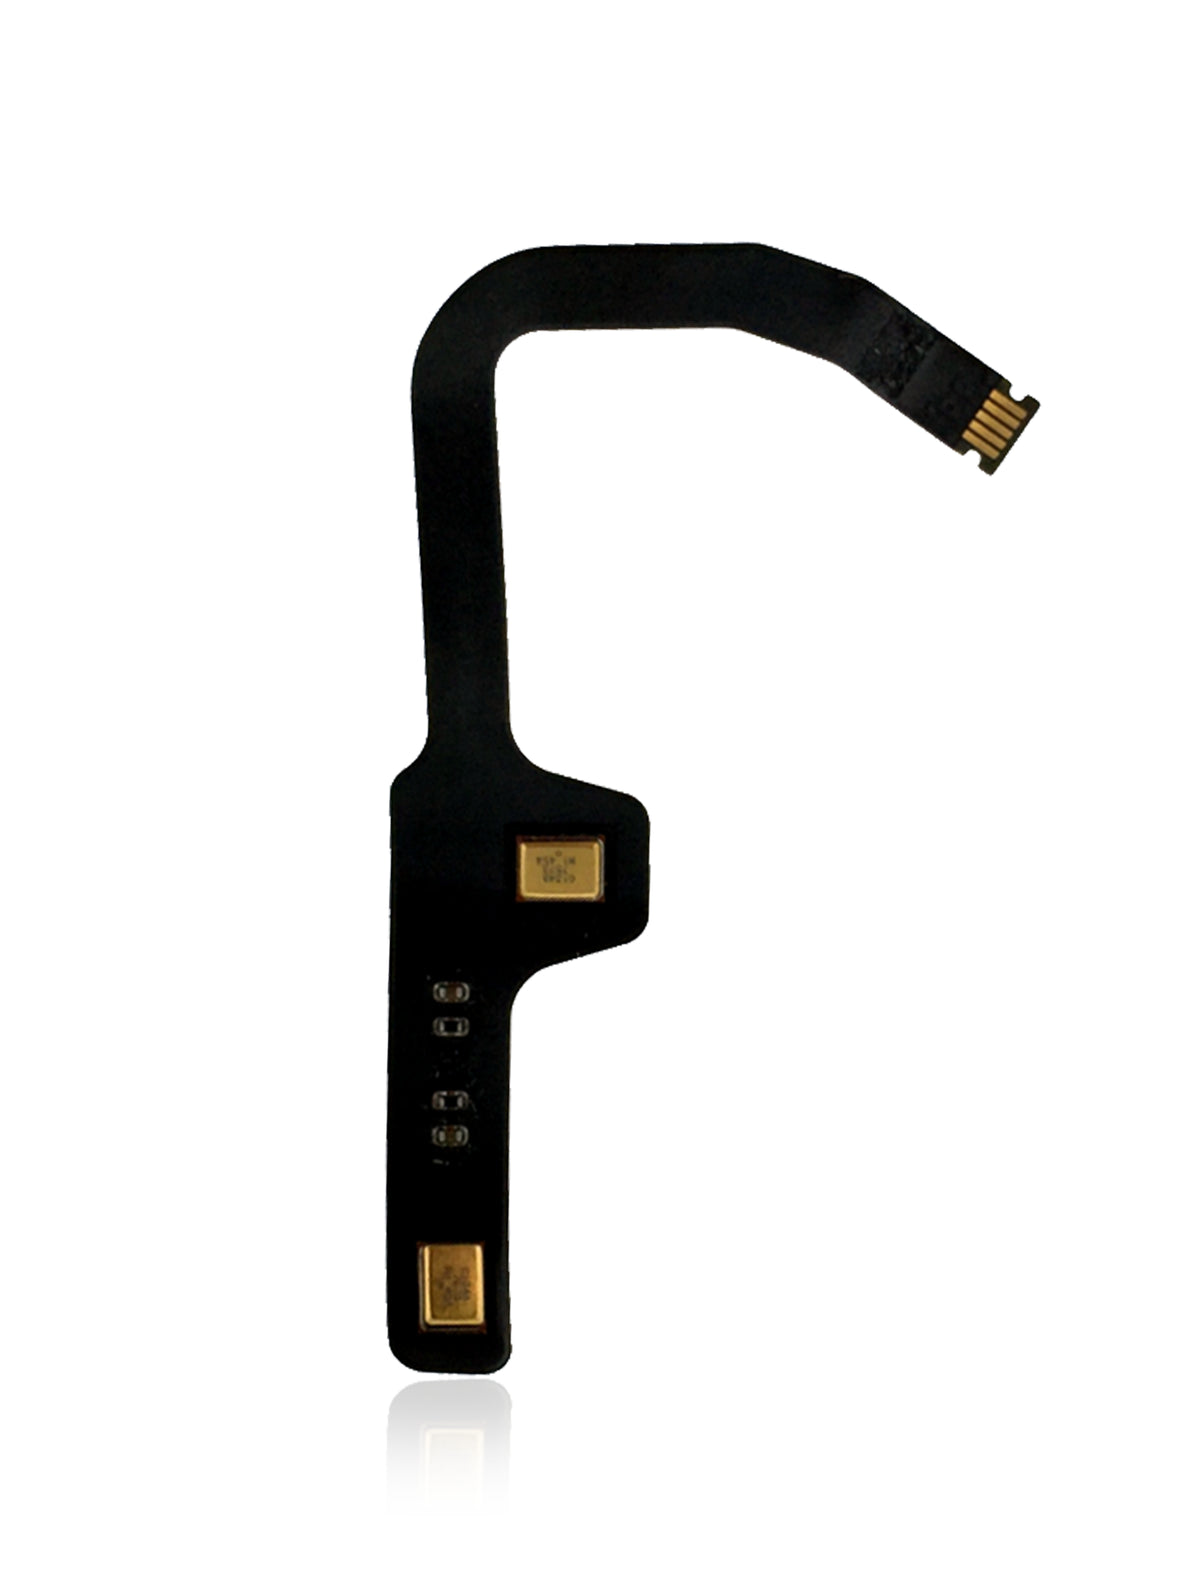 MICROPHONE CABLE FOR MACBOOK PRO 15" RETINA A1398  (MID 2012 / EARLY 2013 / LATE 2013 / MID 2014 / MID 2015)